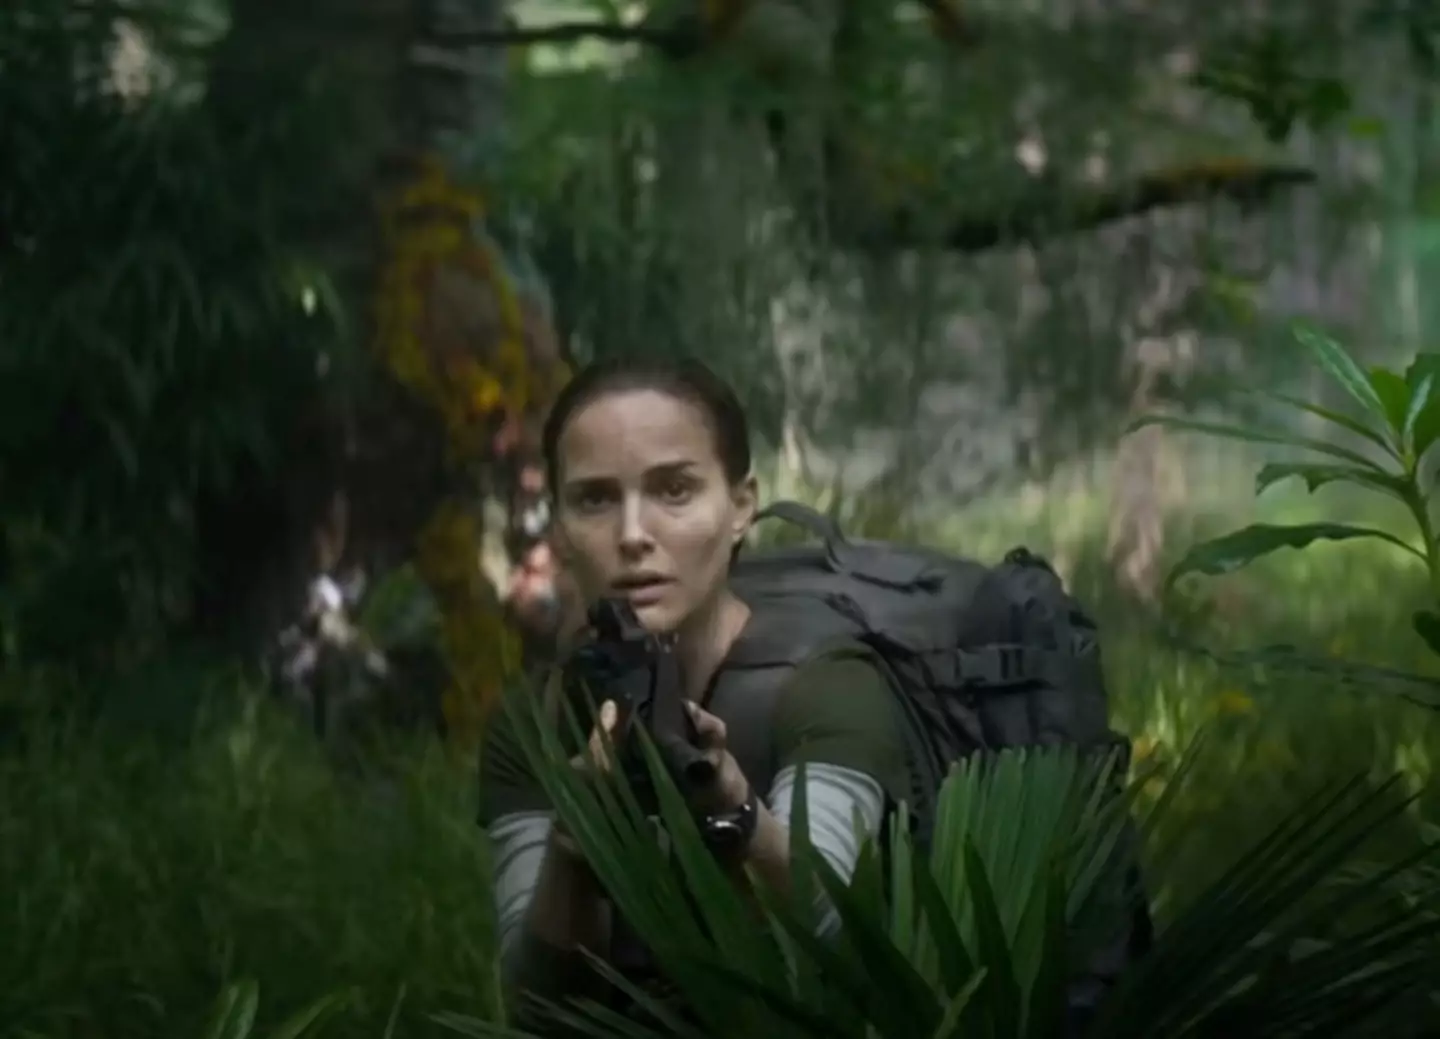 Annihilation is being called 'one of the best' ever horror films.